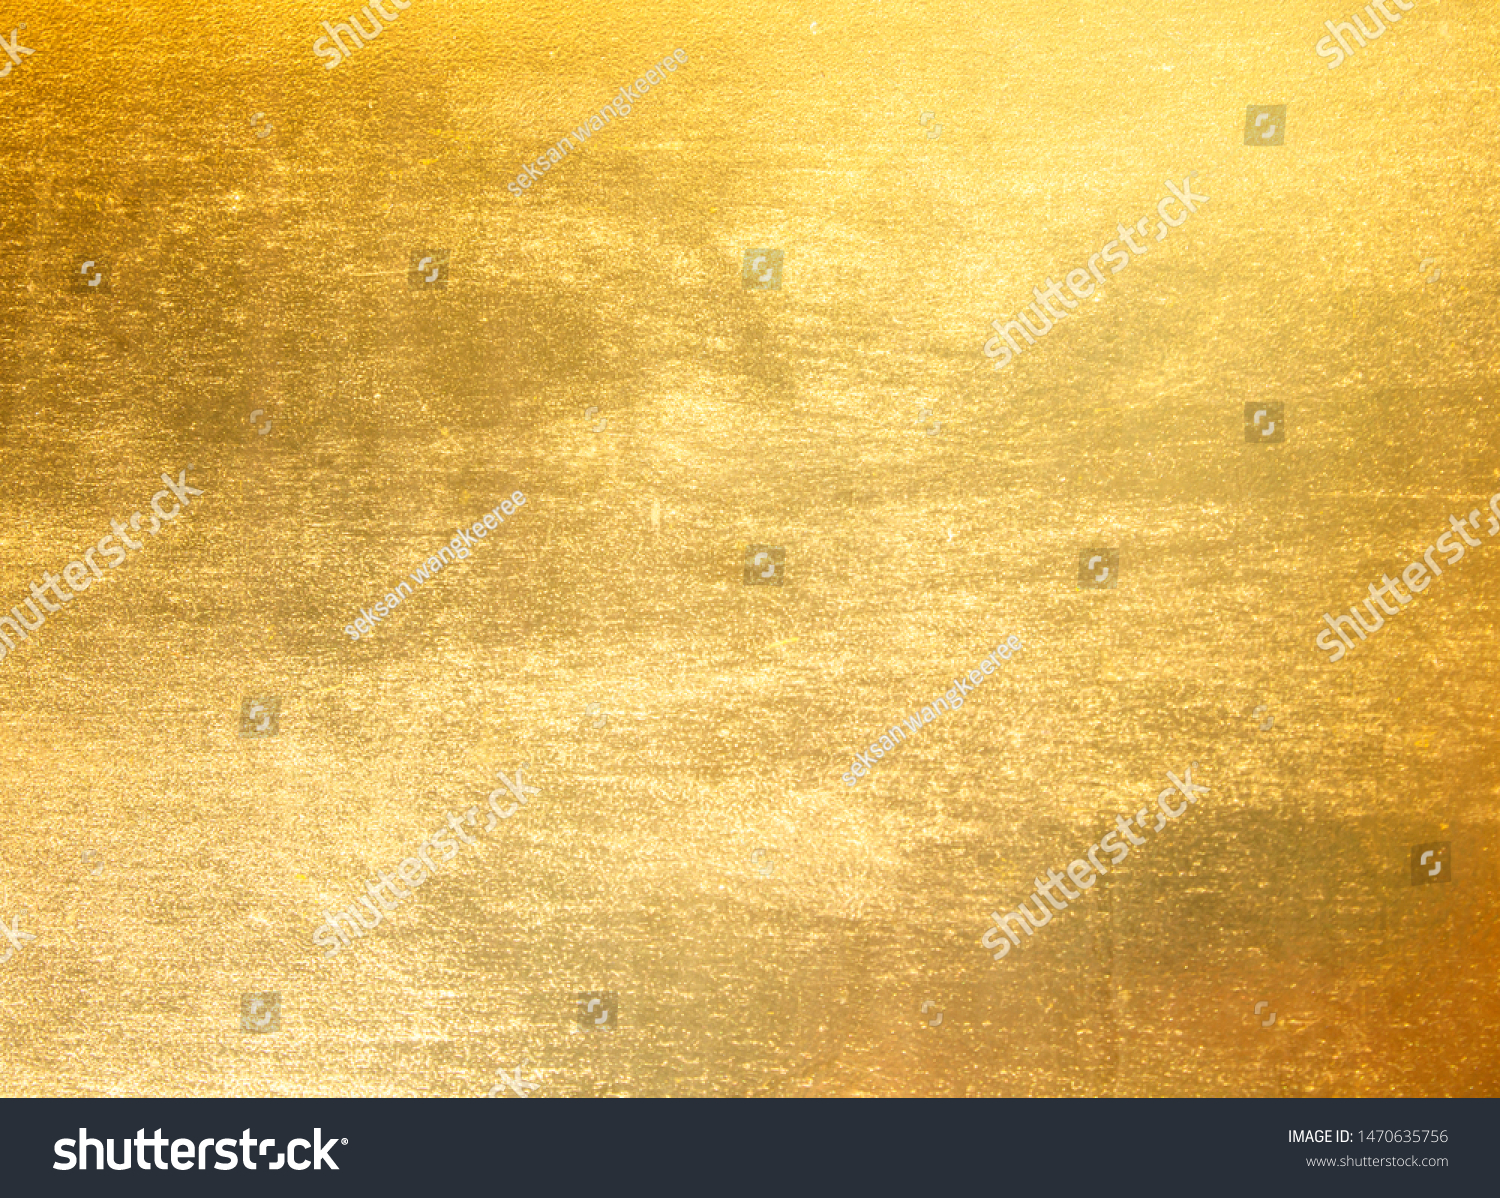 Shiny yellow leaf gold foil texture background #1470635756